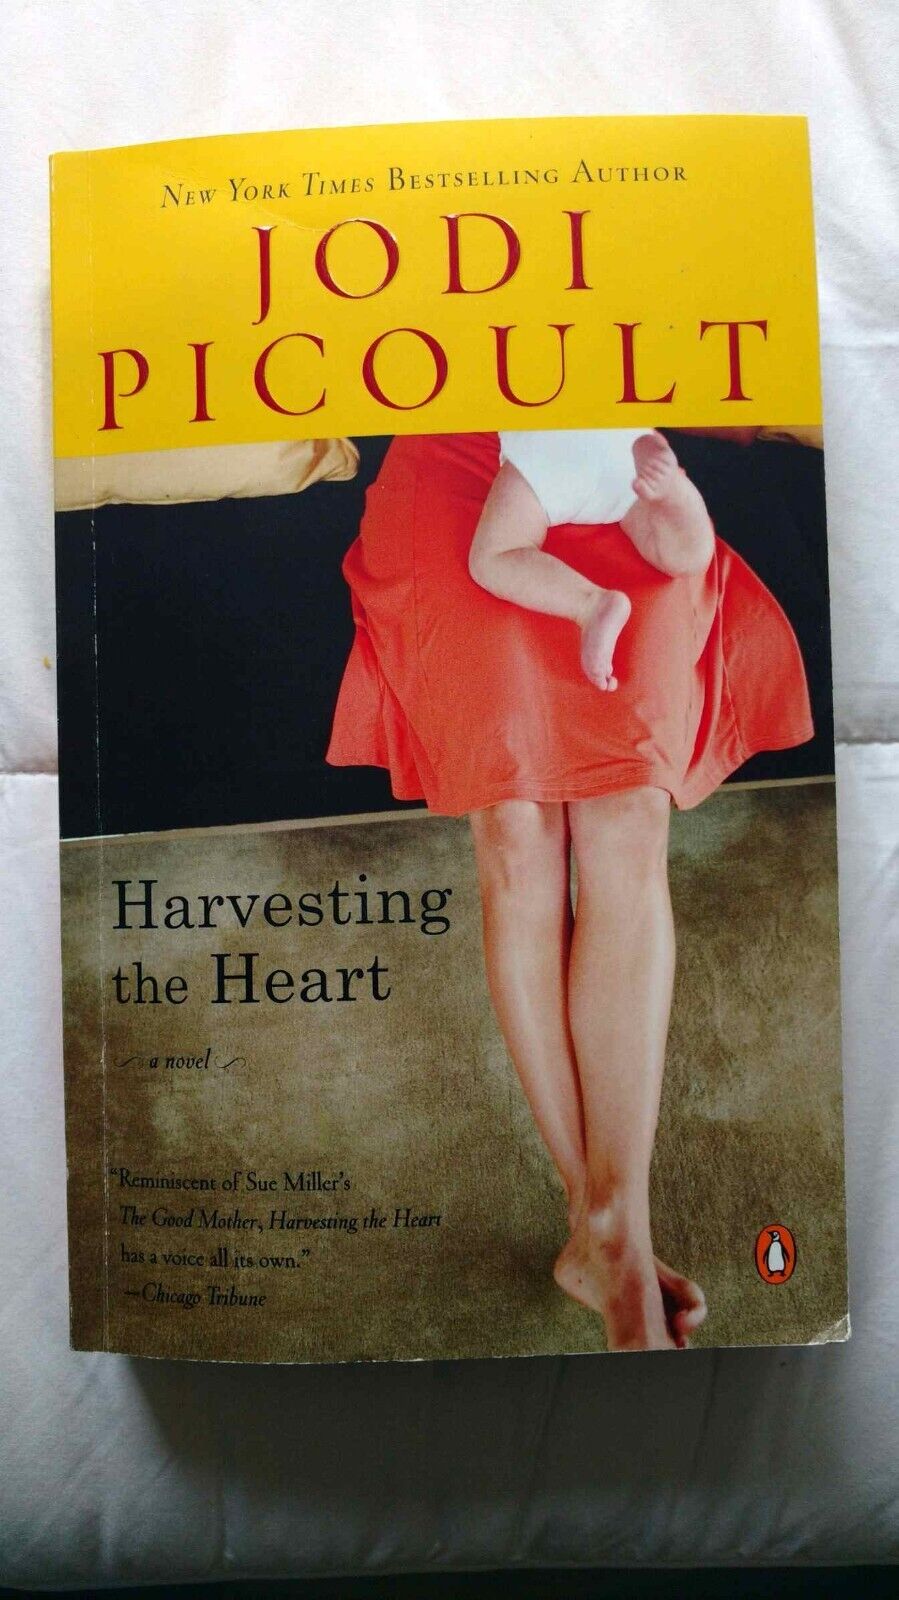 HARVESTING The HEART By Jodi Picoult [1995] -- Trade Paperback / LIKE NEW